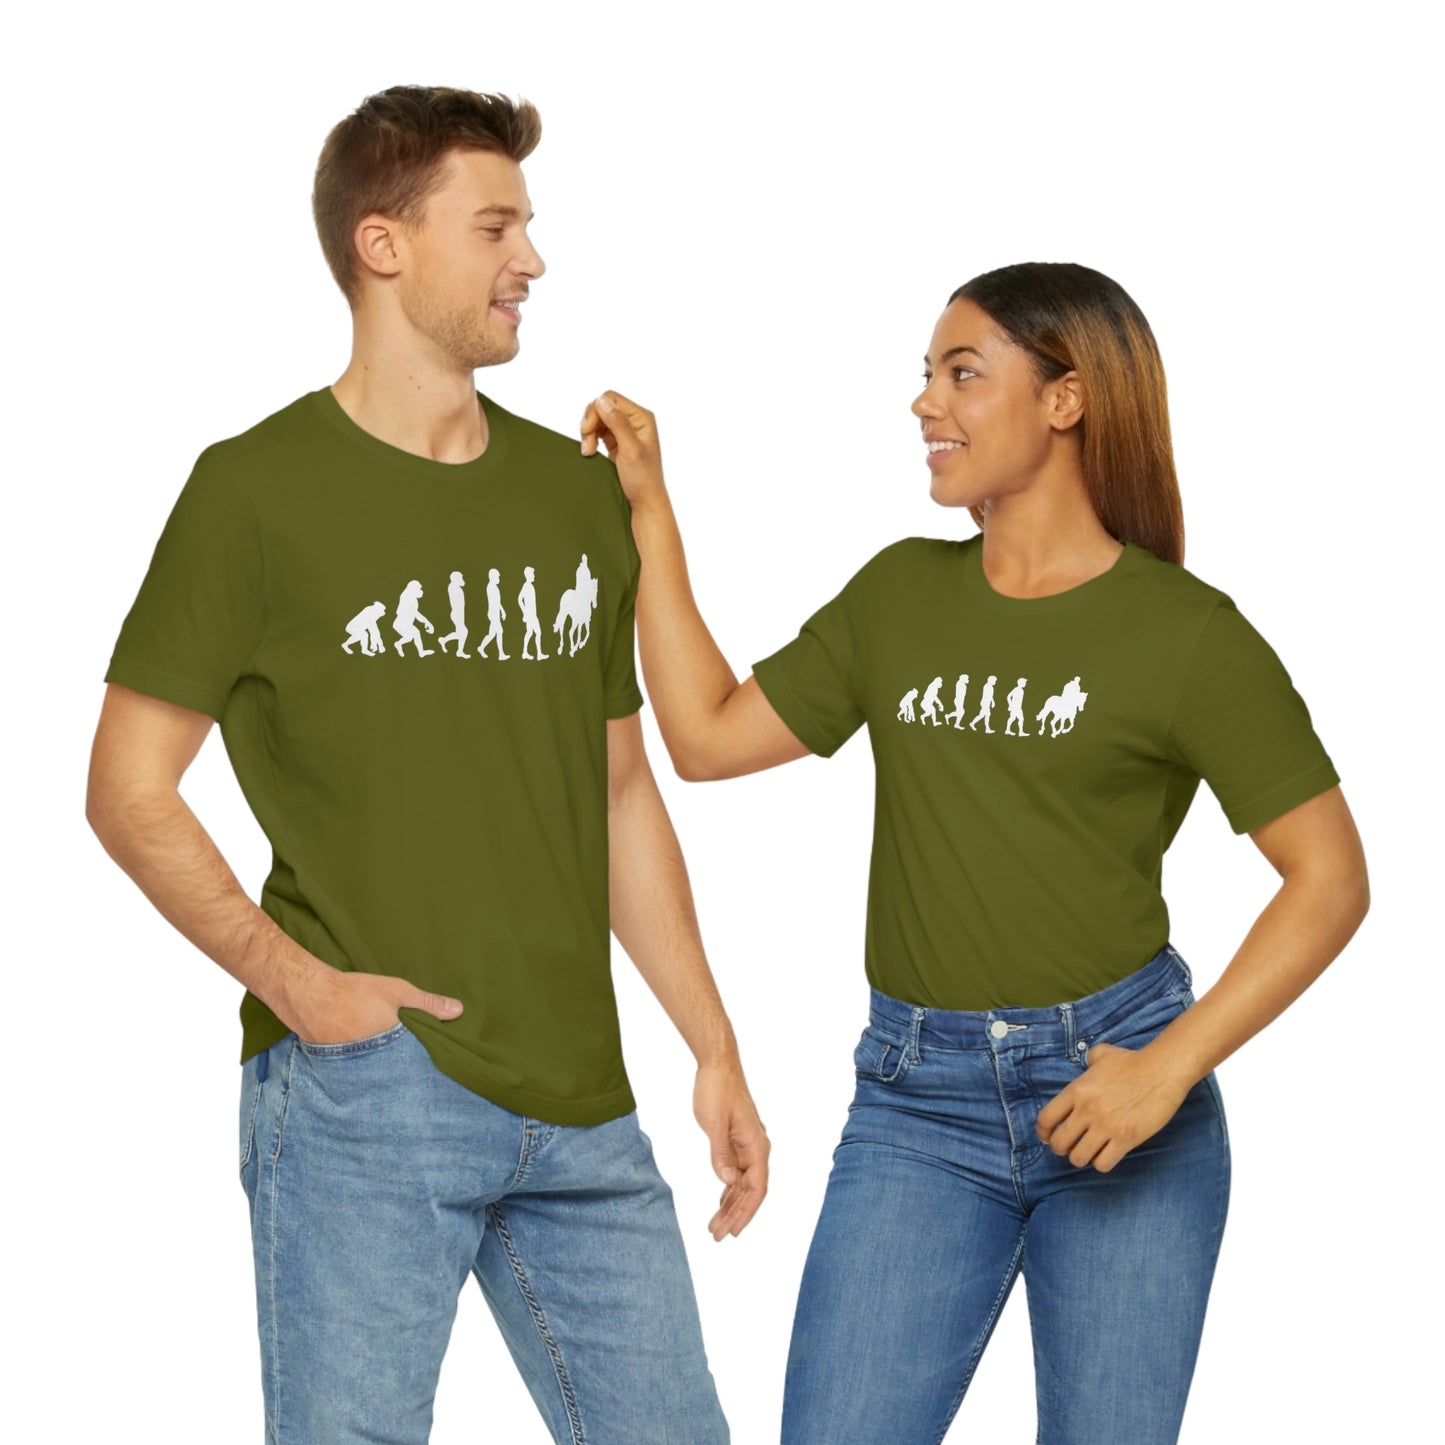 A Comfortable T-Shirt for Men And Women, Unisex Jersey Short Sleeve Tee Dad Mom Adult T-Shirt